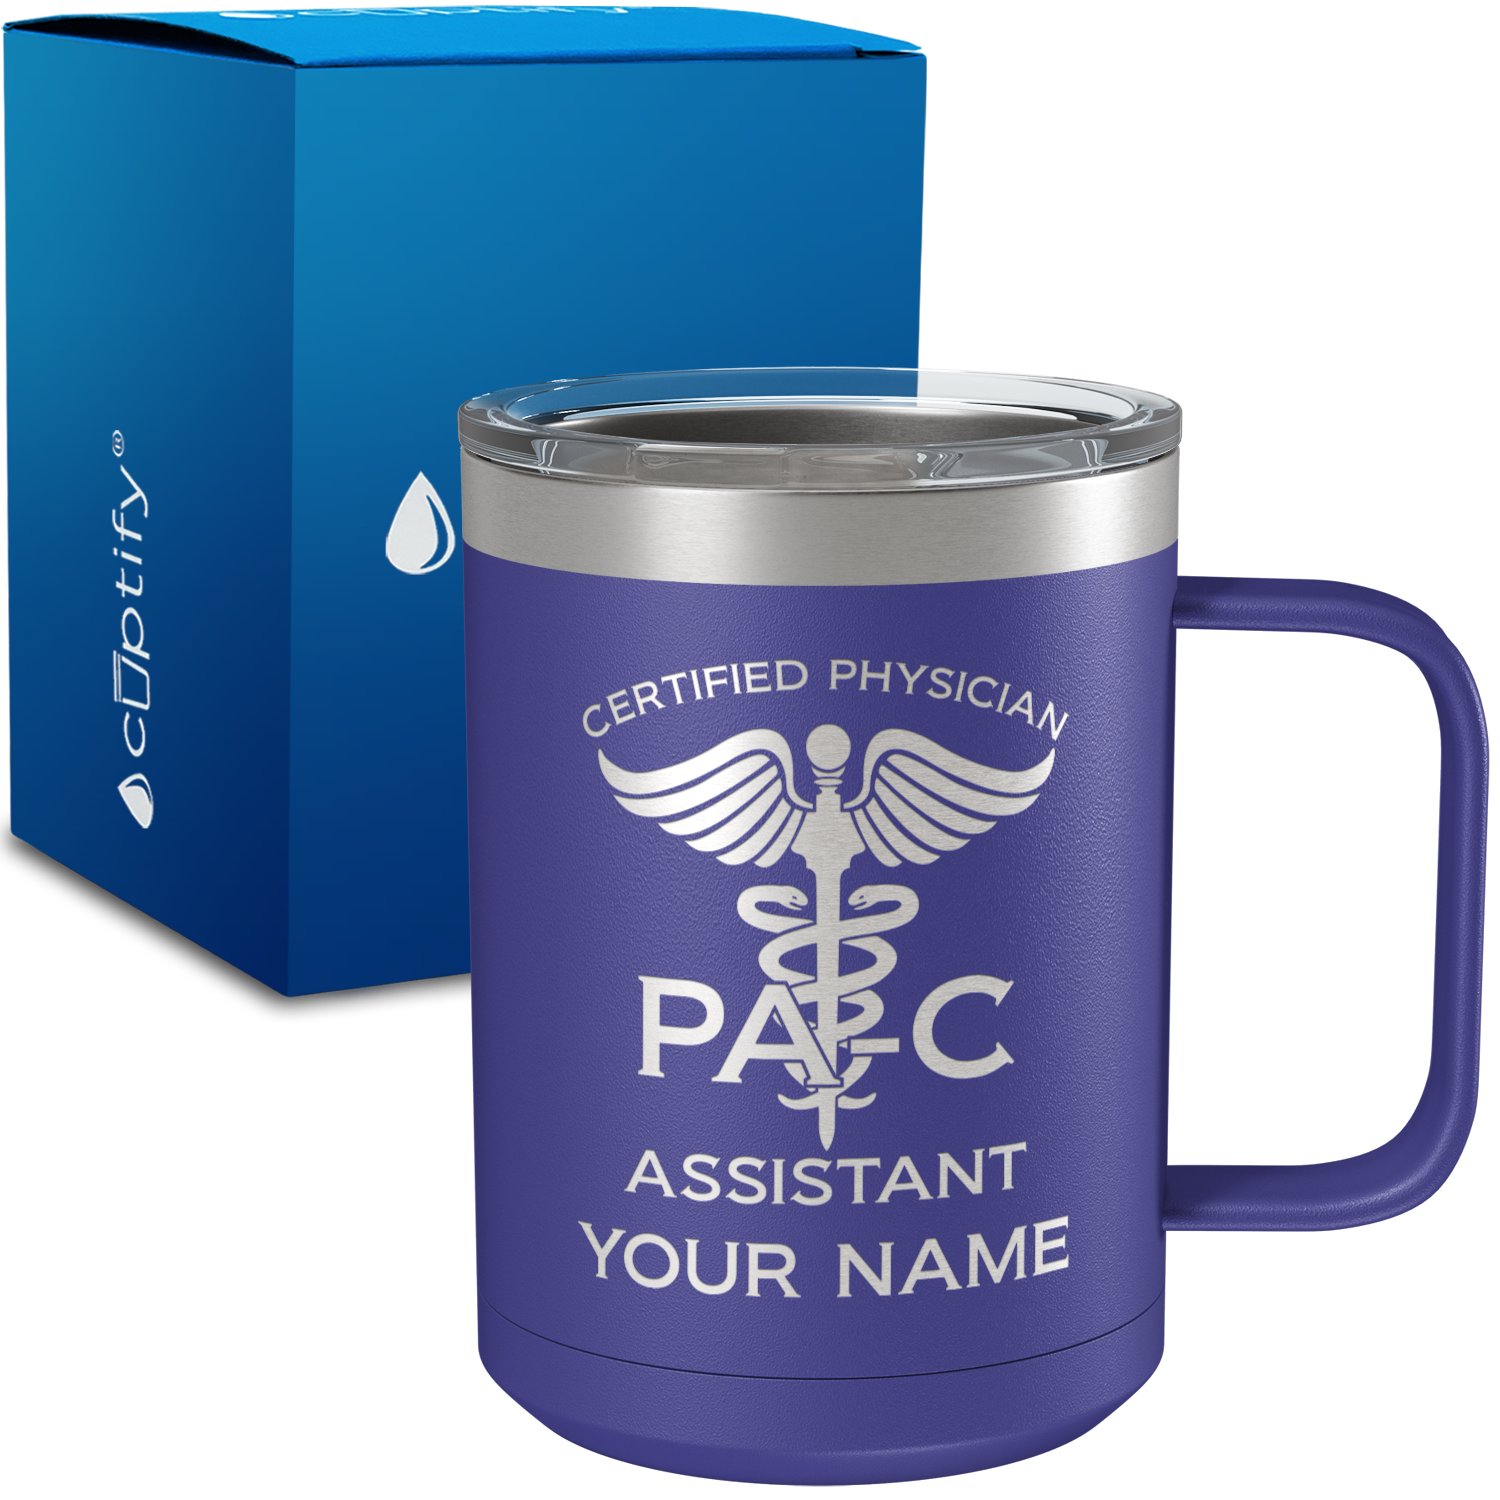 PA-C Certified Physician Assistant Personalized 15oz Stainless Steel Mug